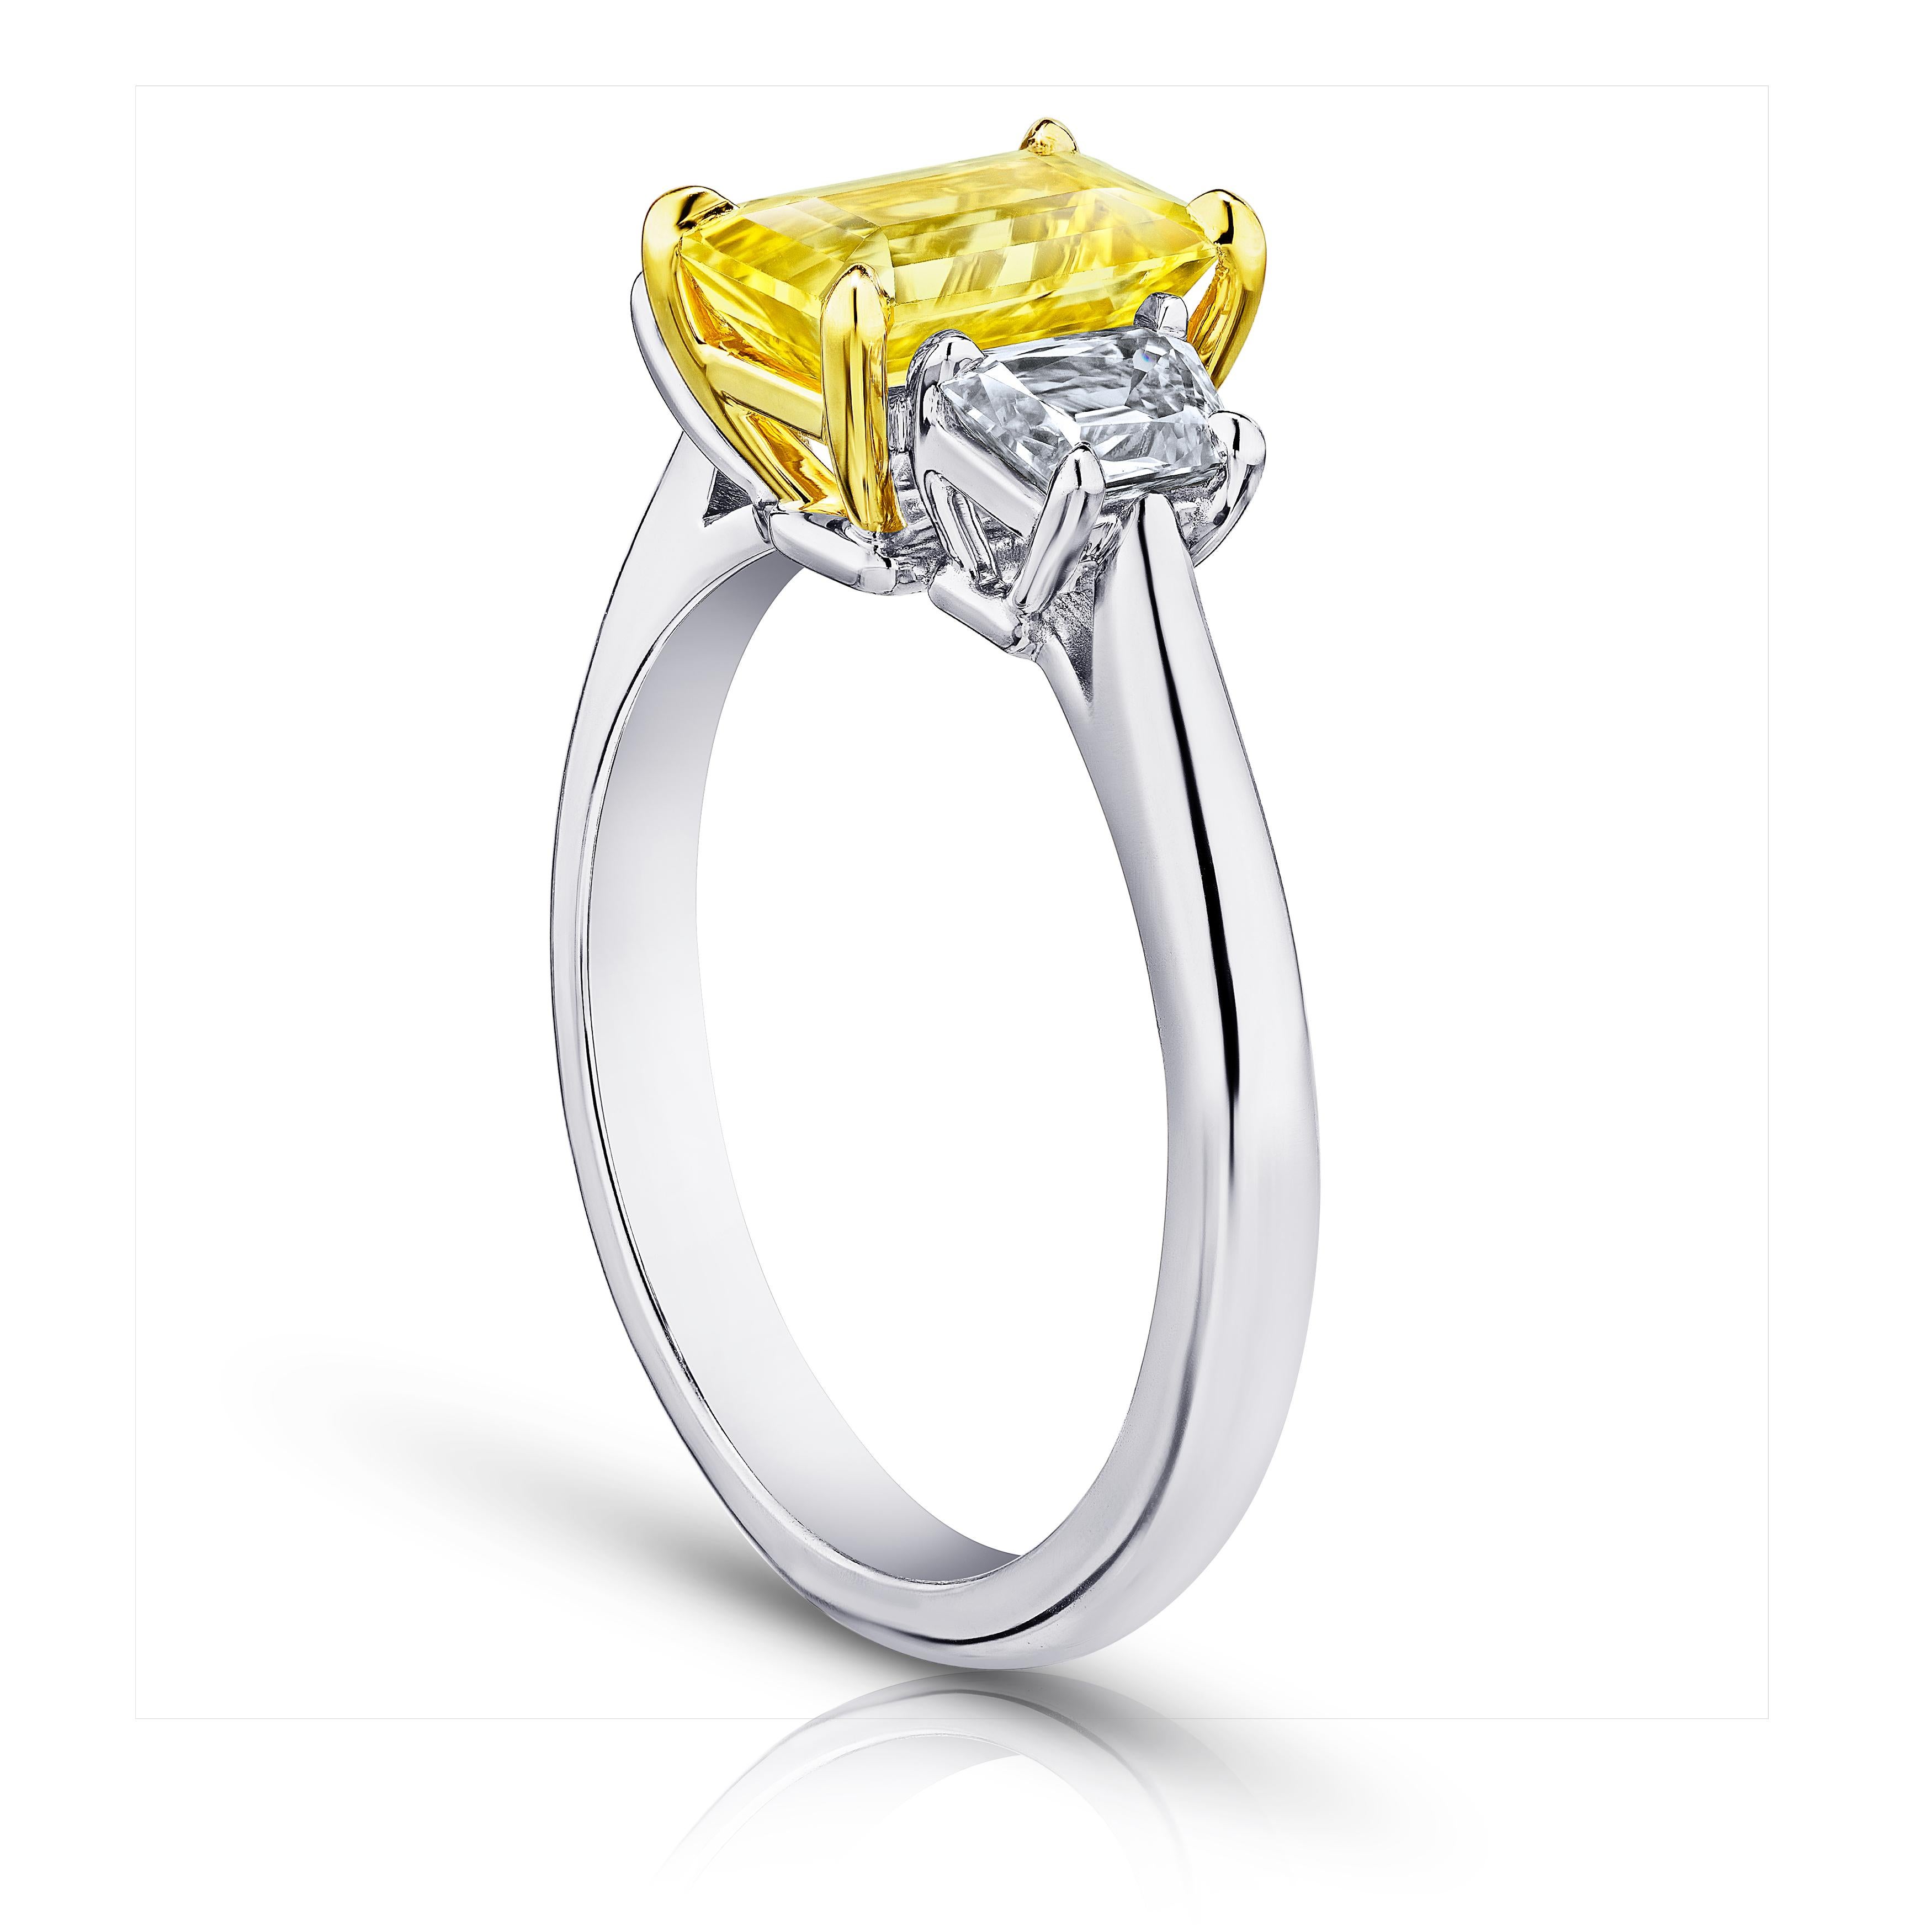 2.05 carat emerald cut yellow sapphire (no heat) with trapezoid diamonds .72 carats set in a platinum with 18k yellow gold ring